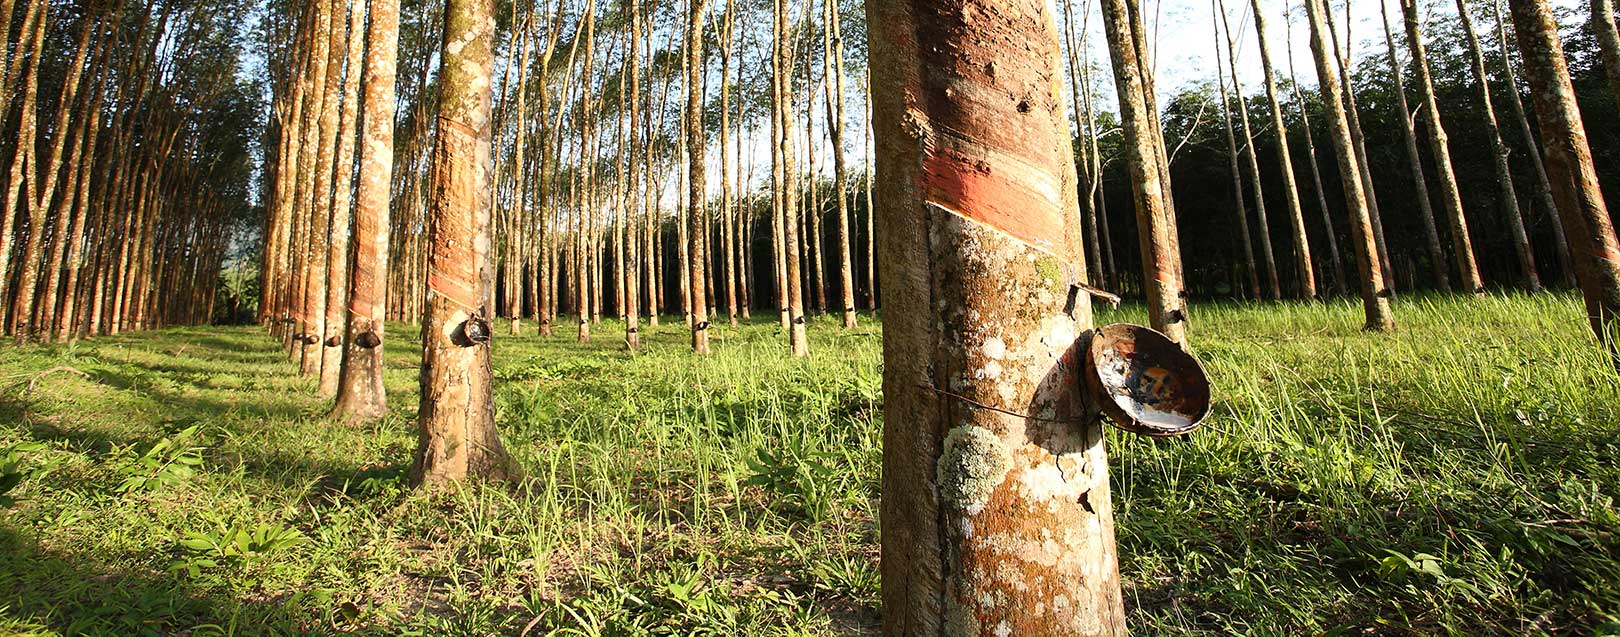 Natural rubber output up 21% in Aug, exports decline